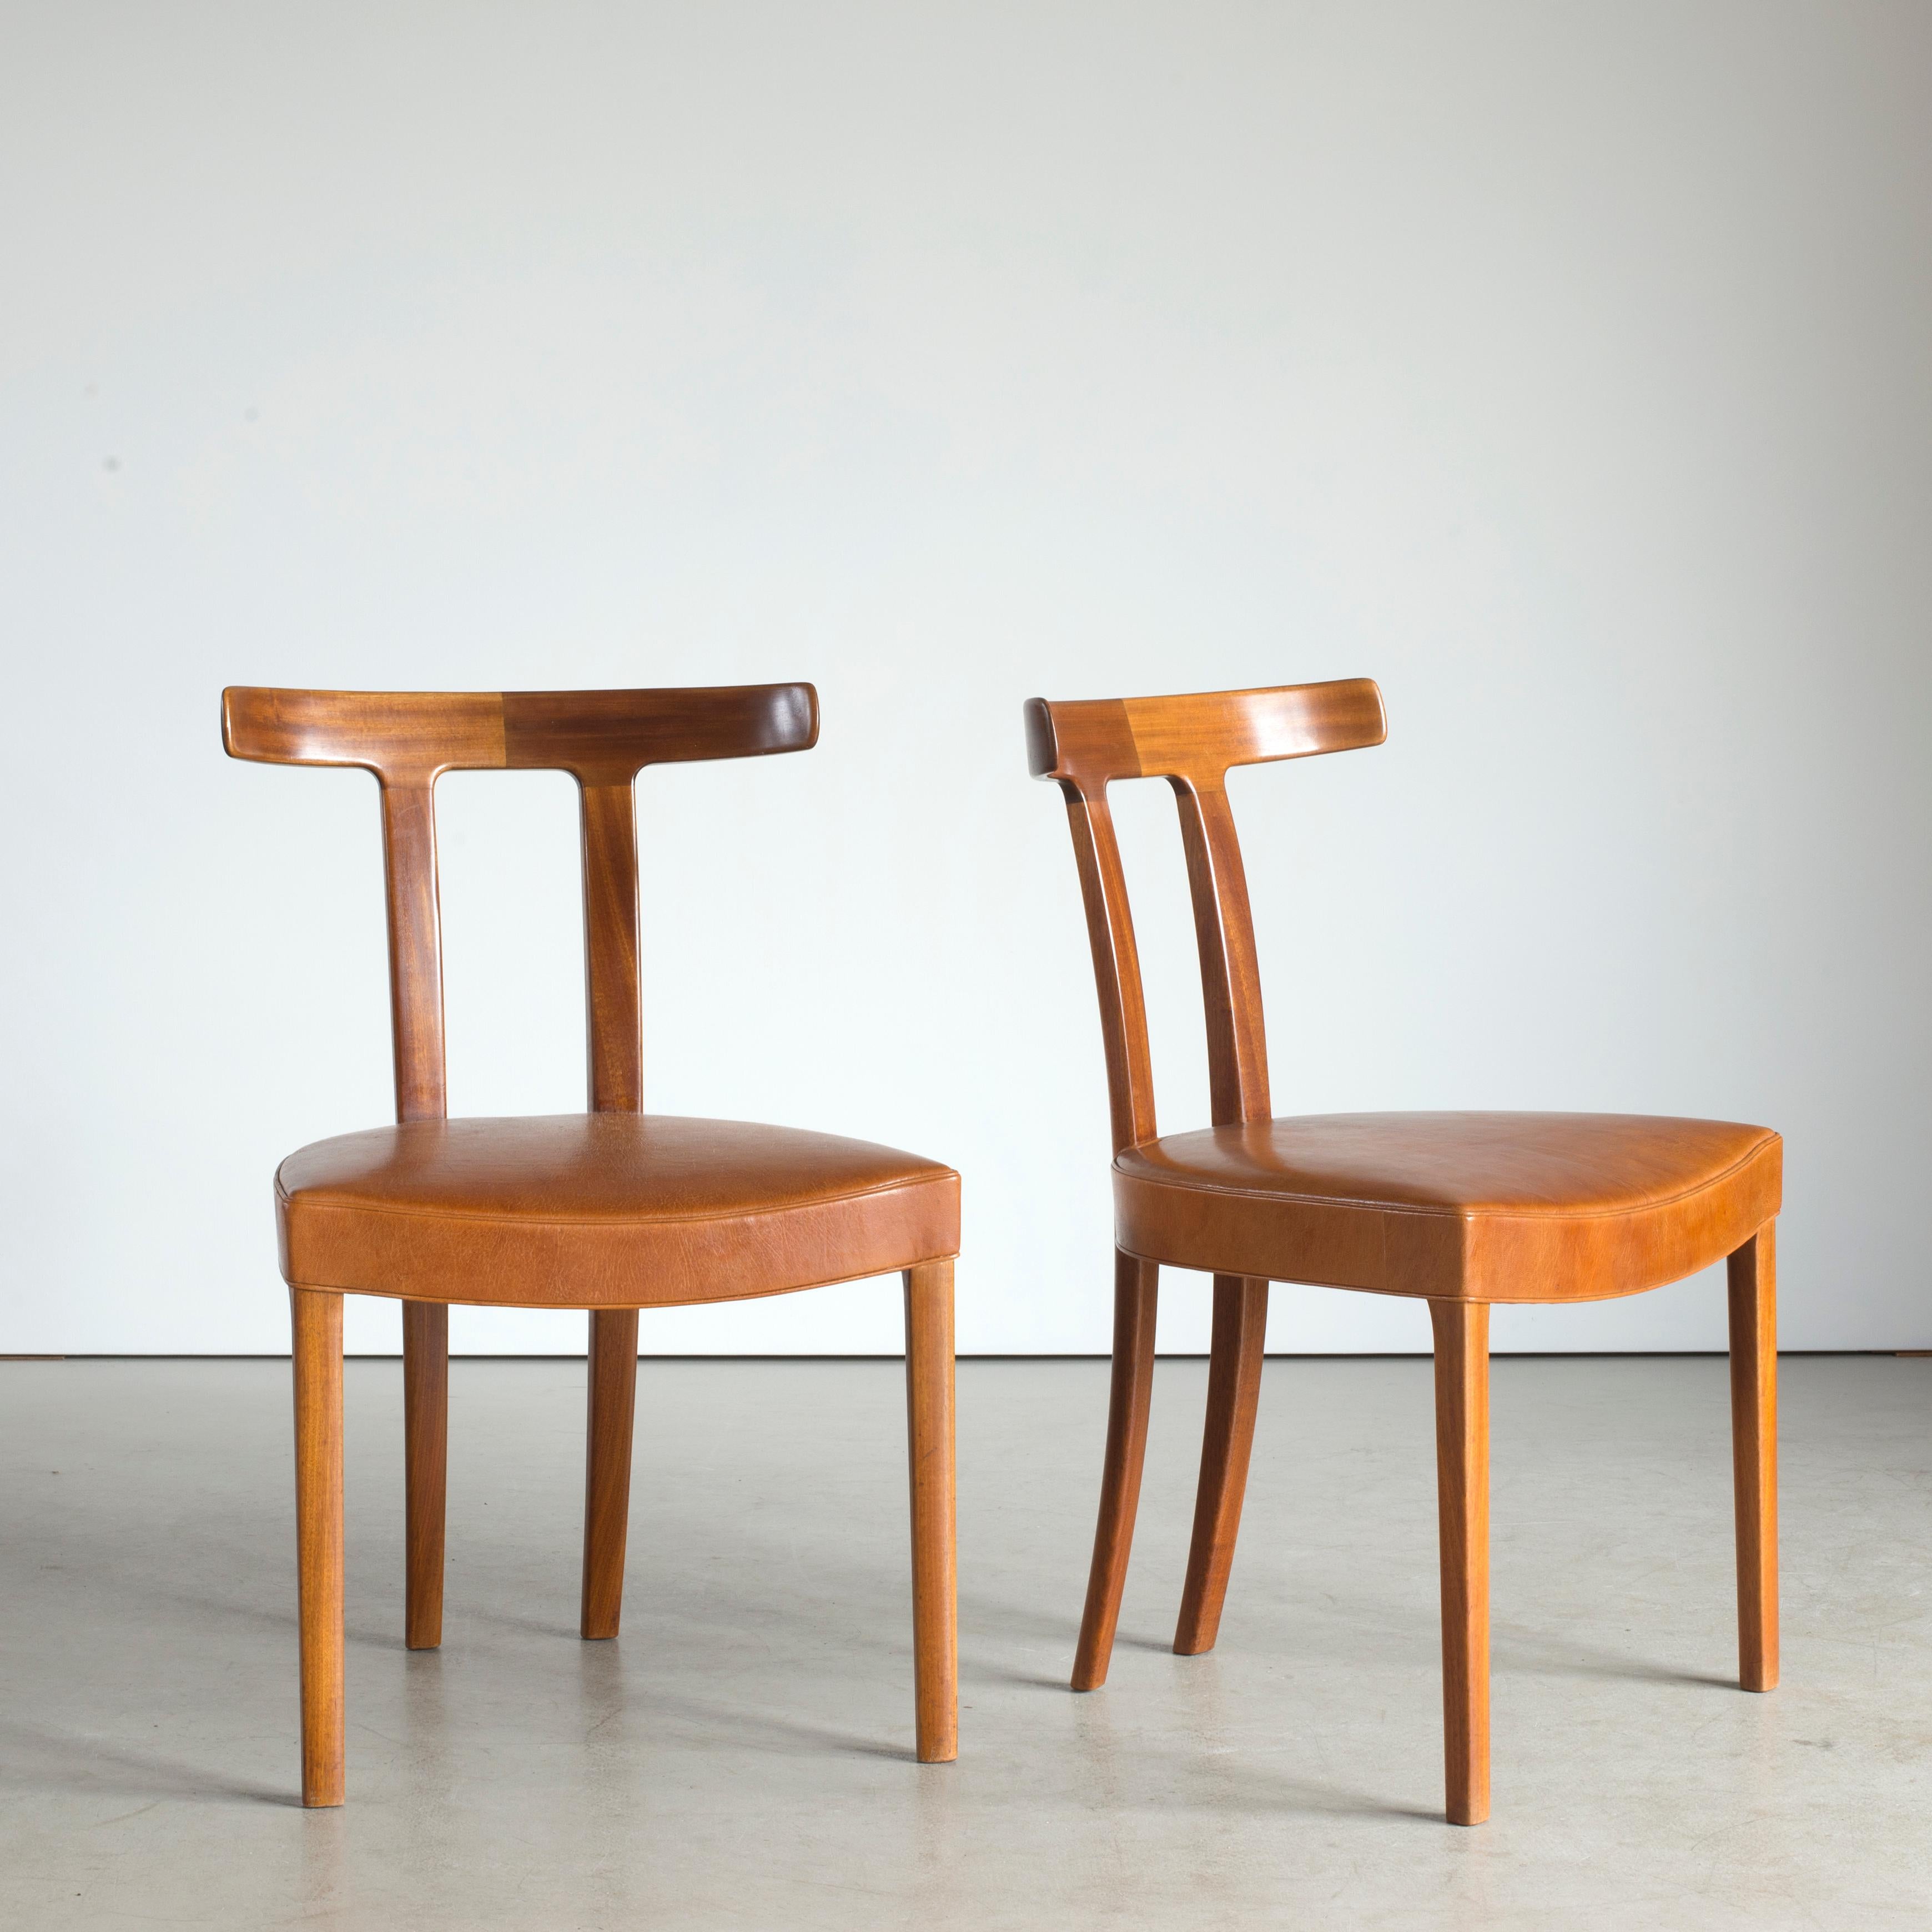 Ole Wanscher pair of 'T' chairs of mahogany. Executed by cabinetmaker A.J. Iversen, Denmark.

Underside of each chair with manufacturer's paper label Snedkermester A.J. Iversen Kóbenhavn.